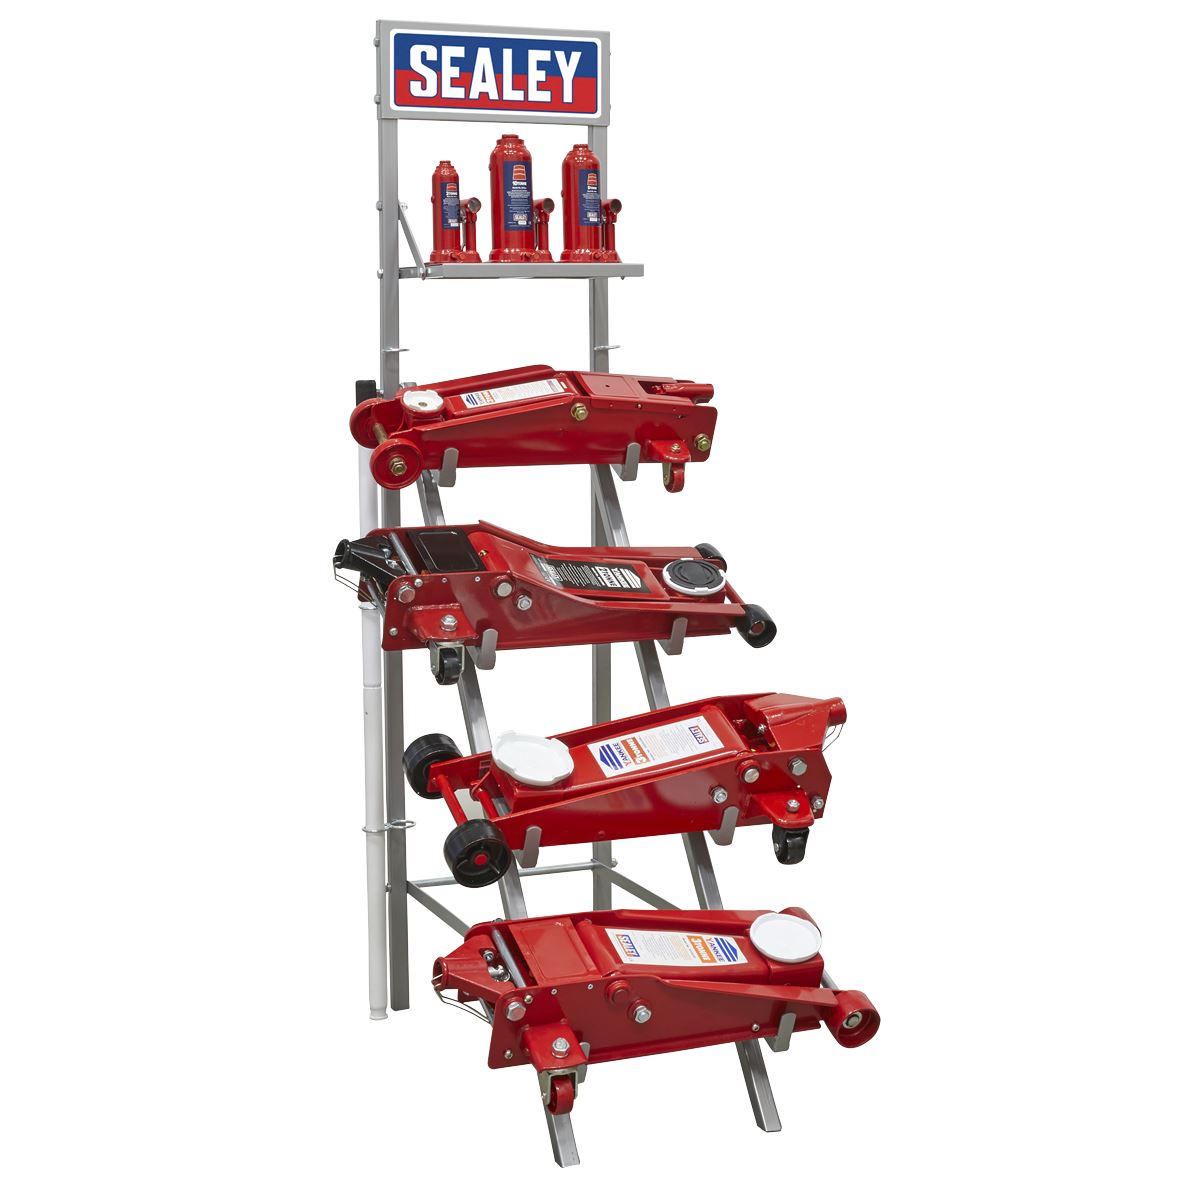 Sealey 4040 Jack Stand Deal